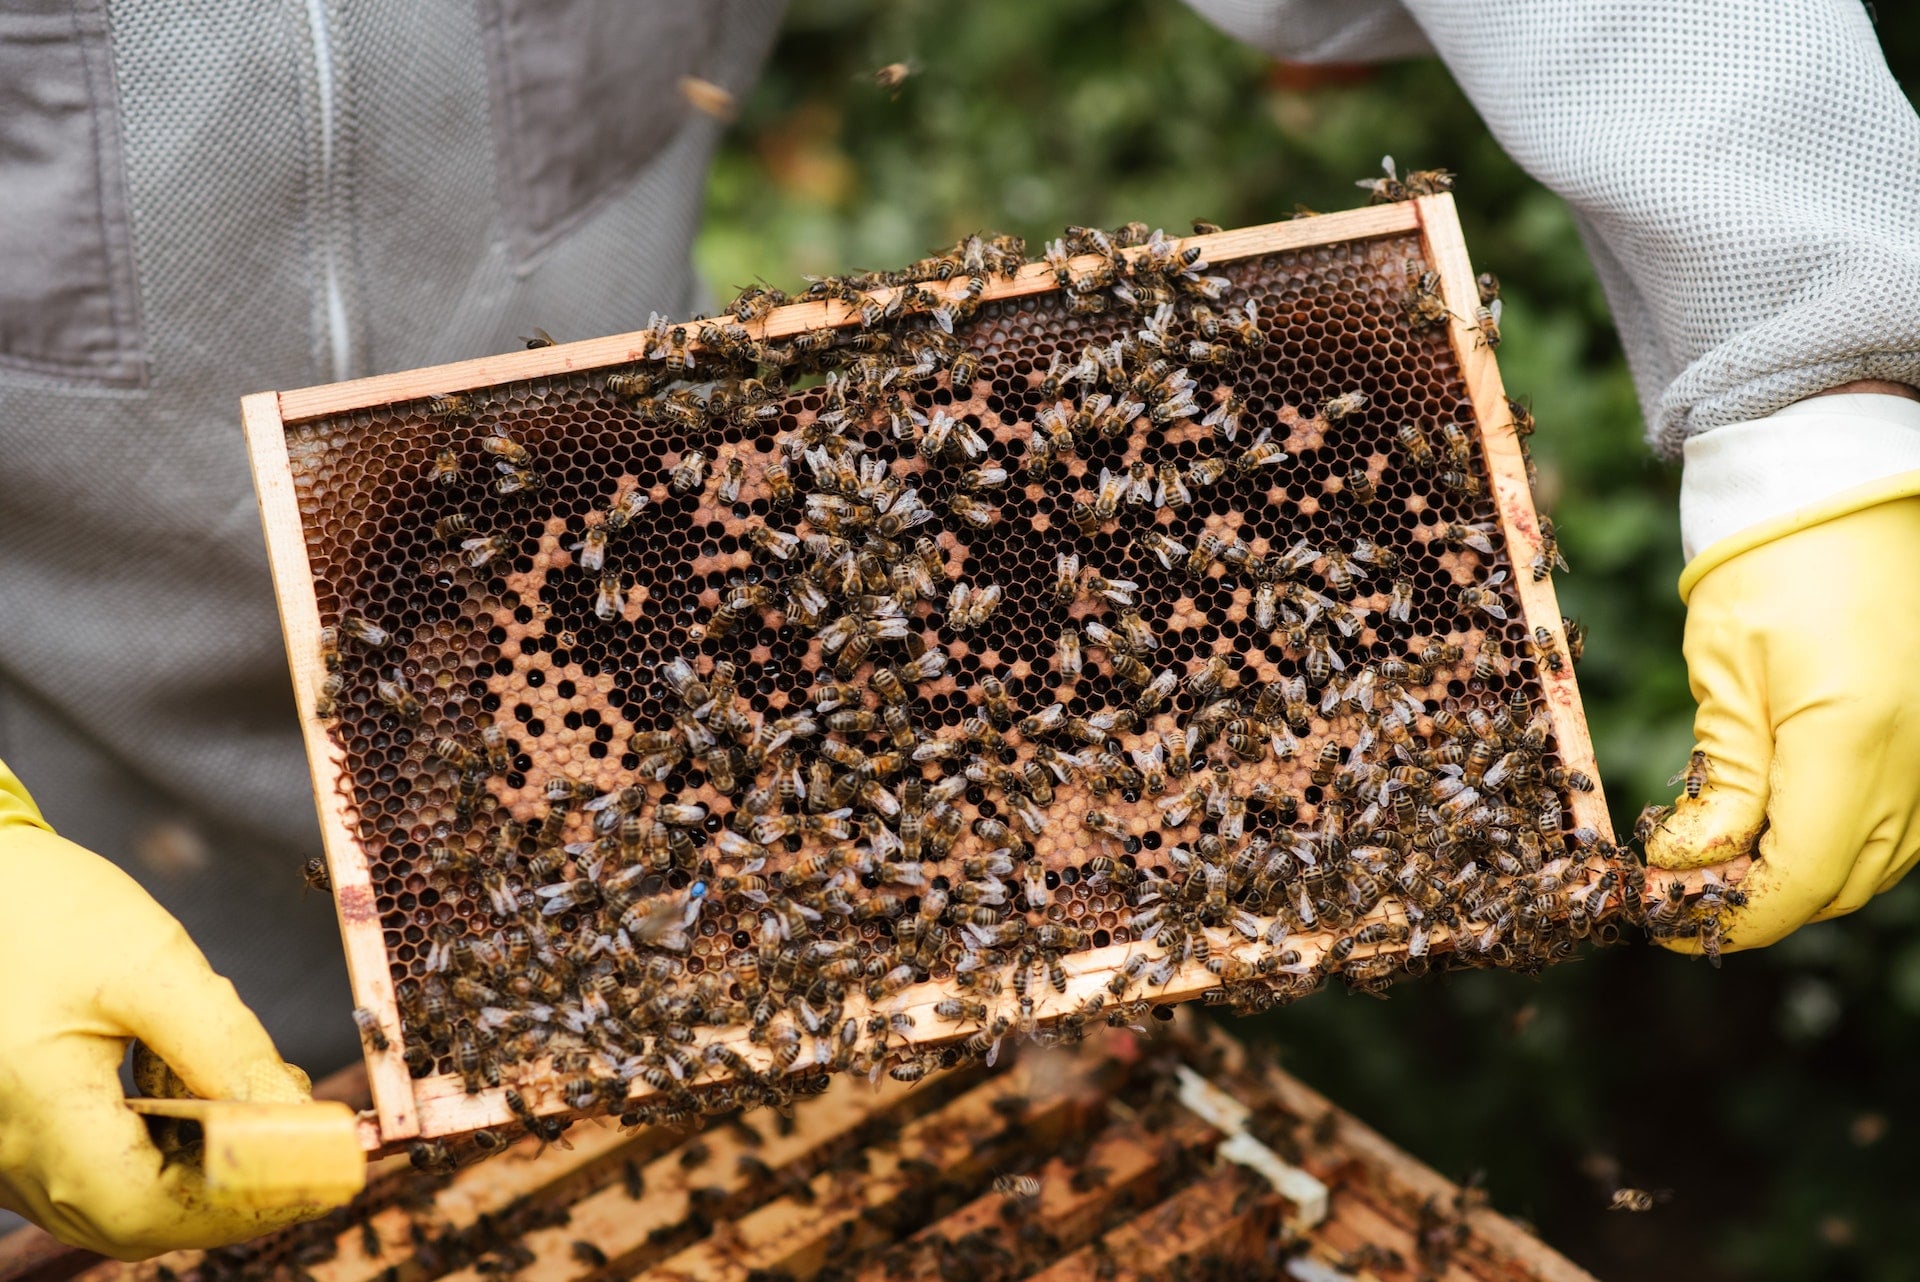 Beehive vs. Honeycomb: Exploring the Structures and Functions of Nature's Ingenious Architects